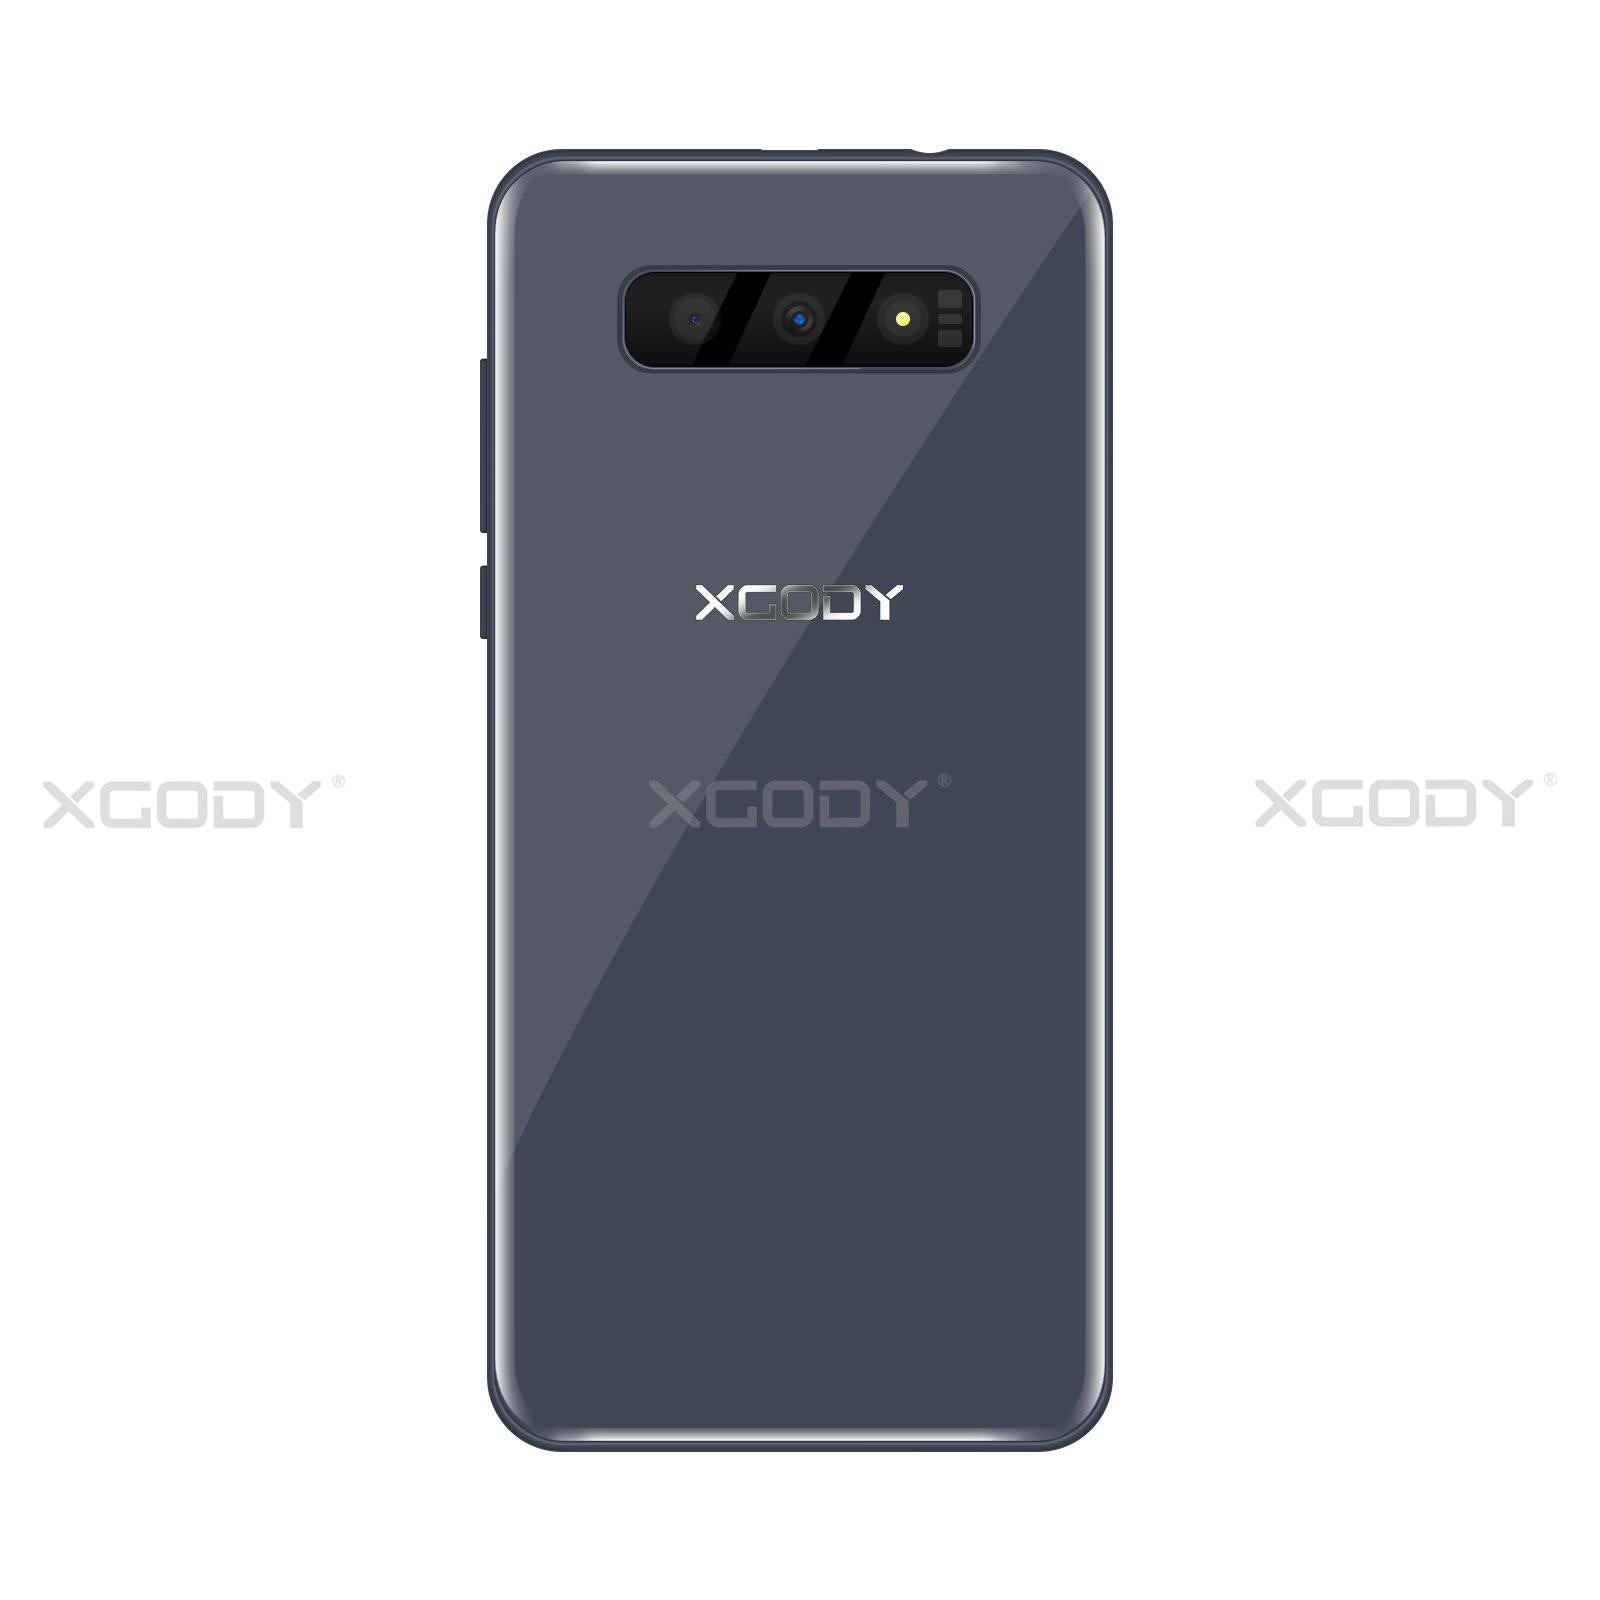 Cost-effective and Most worthwhile XGODY S10 Zoll Fully Unlocked 16GB Dual SIM Smarthphone - XGODY 